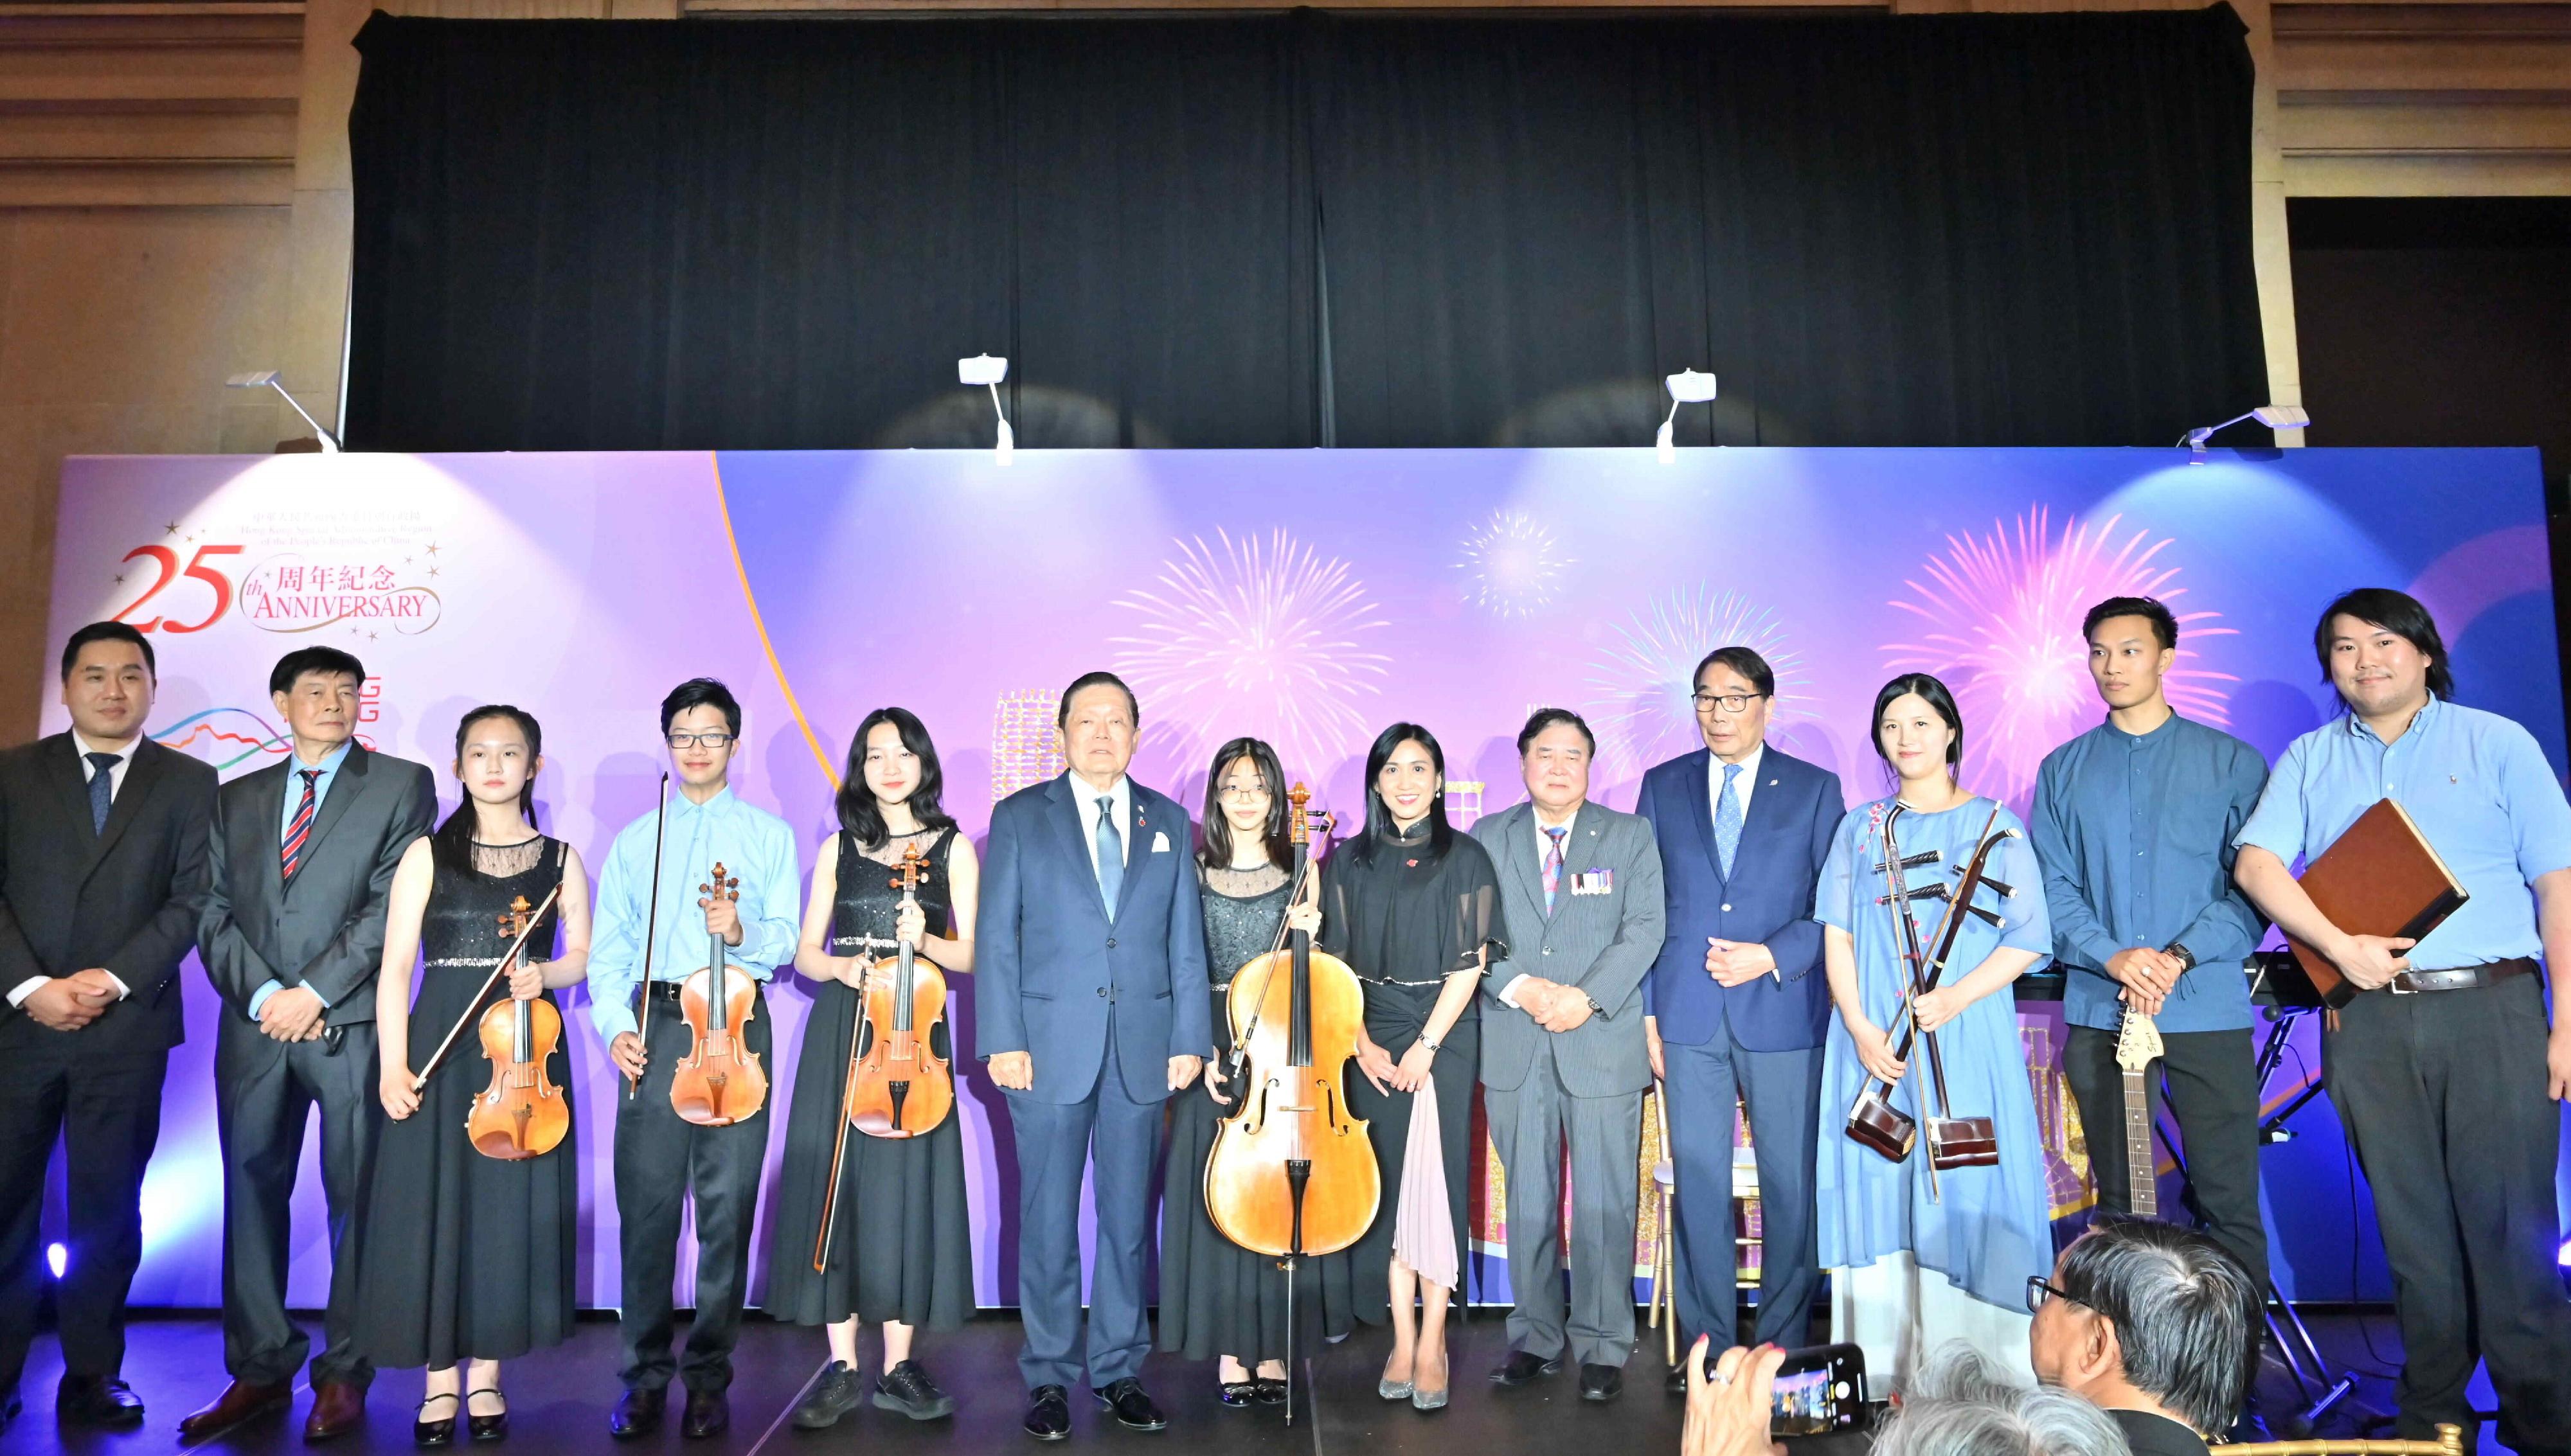 The Hong Kong Economic and Trade Office (Toronto) (HKETO) held an official gala dinner in Toronto yesterday (June 28, Toronto time) in celebration of the 25th anniversary of the establishment of the Hong Kong Special Administrative Region. The Director of the HKETO, Ms Emily Mo (sixth right), is pictured with Member of Parliament of Canada Mr Shaun Chen (first left); the Ontario Cross-Cultural Music Society President, Mr Ken Zheng (second left); Canadian Senator Mr Victor Oh (sixth left); former Lieutenant Governor of Manitoba the Honorable Philip Lee (fifth right); and Honorary Patron Mr Stephen Siu (fourth right), with musicians of the theme music piece "Dawn".

